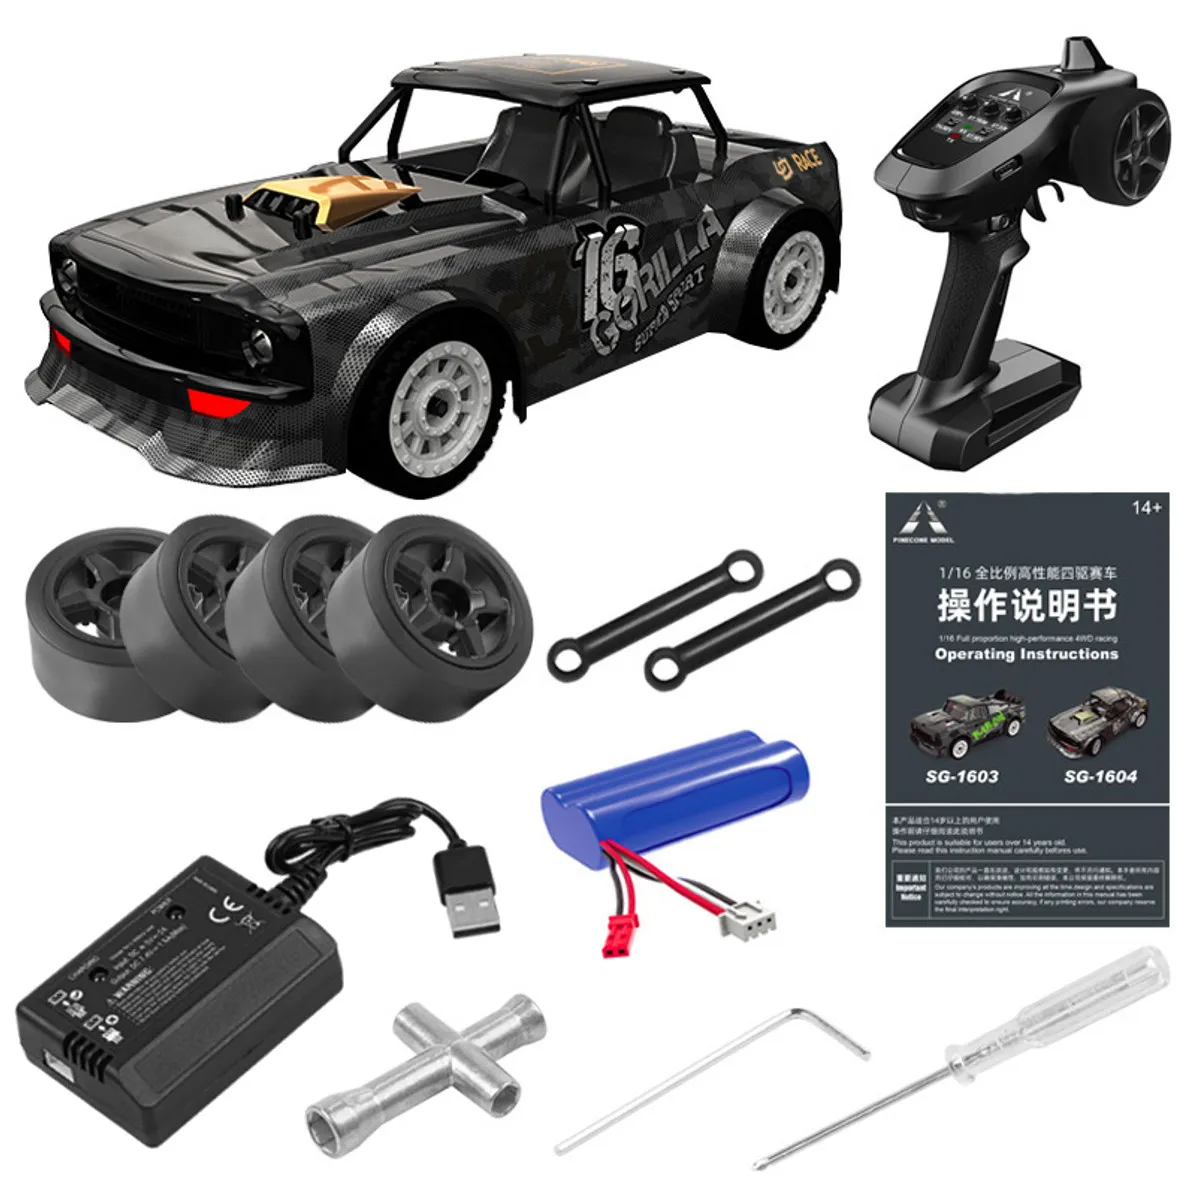 SG 1604 RTR 1/16 2.4G 4WD 30km/h RC Car LED Light Drift On-Road Proportional Control Vehicles Model Racing Machine Gift Toy enlarge